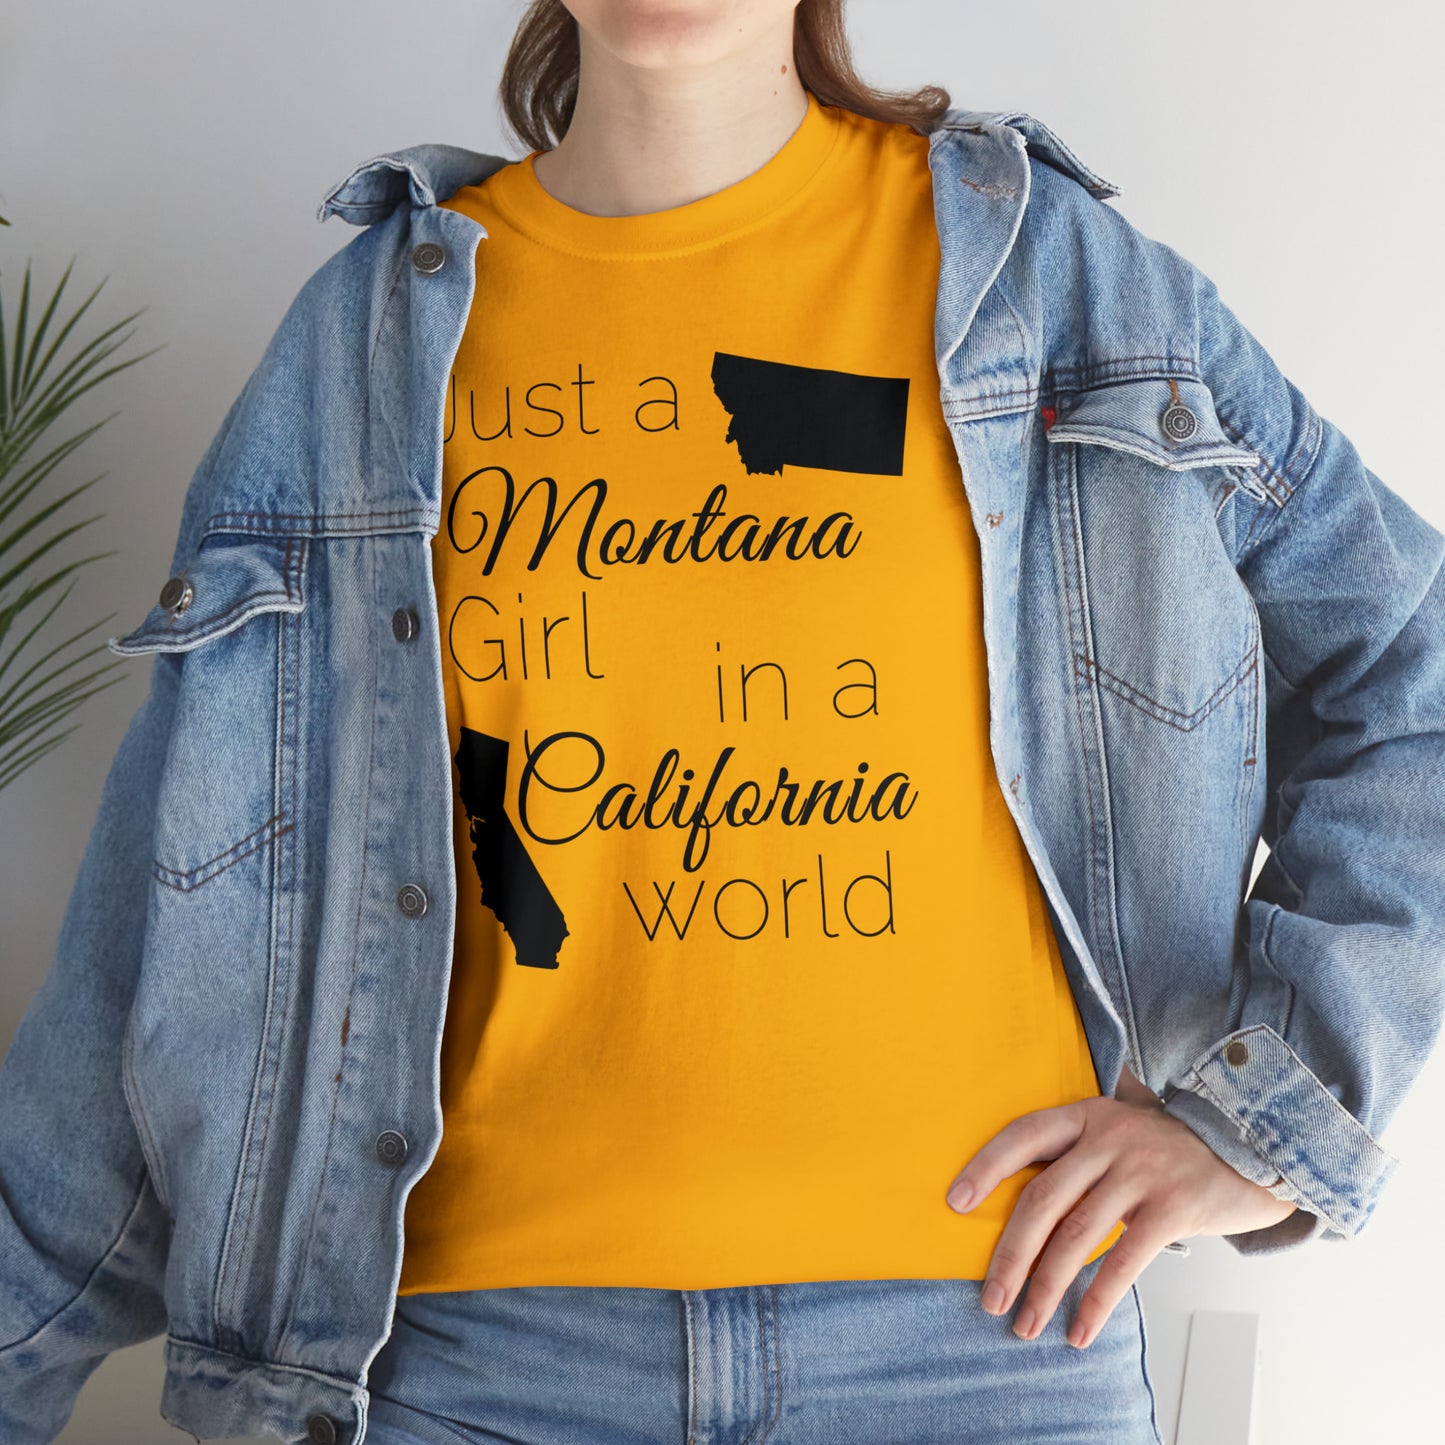 Just a Montana Girl in a California World Unisex Heavy Cotton Tee